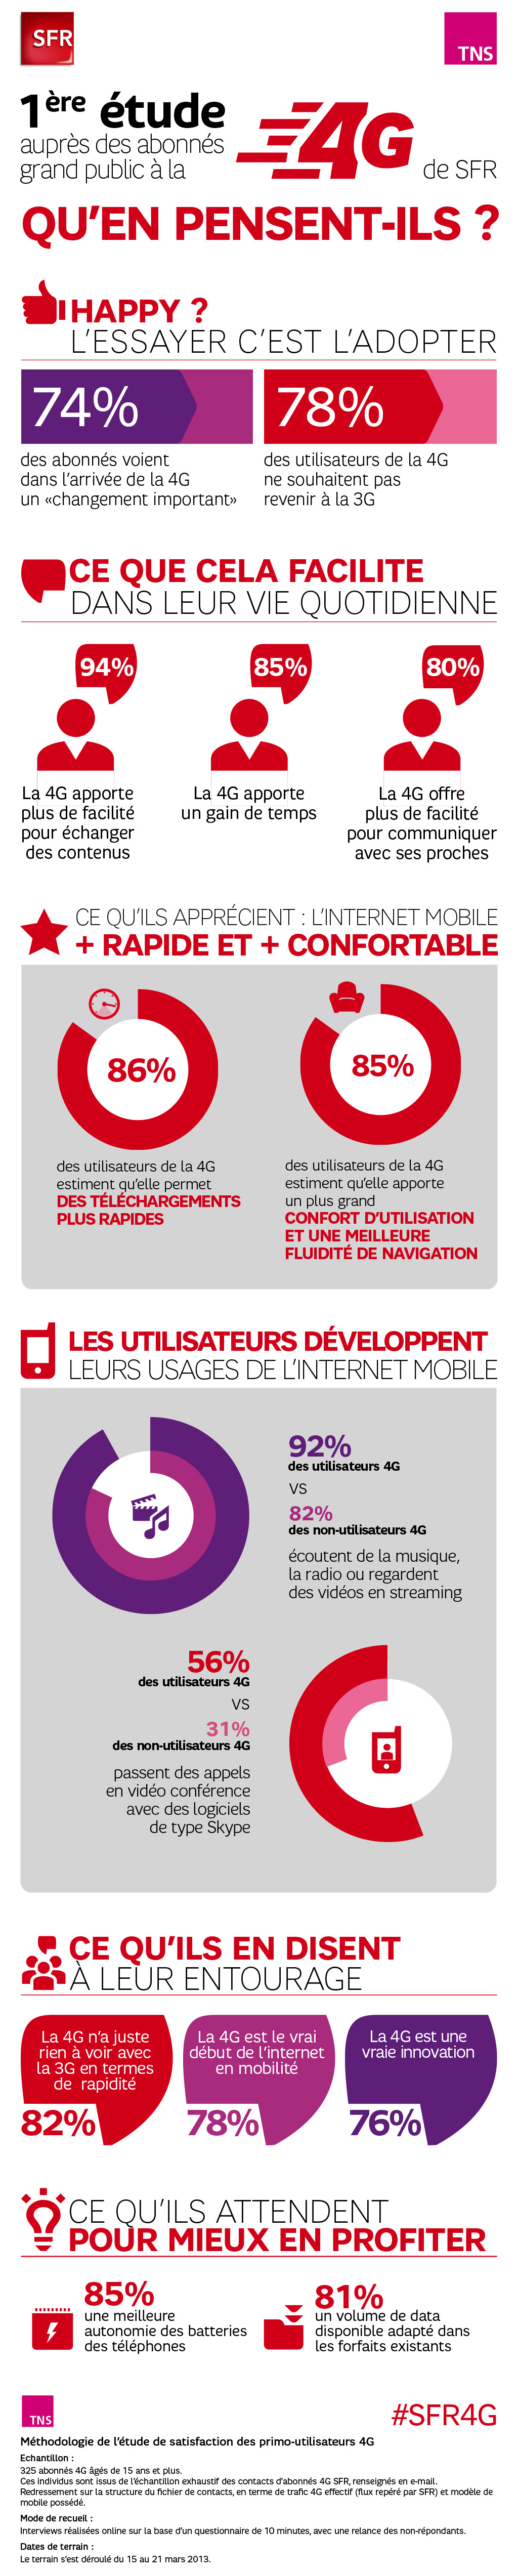 infographie 4G